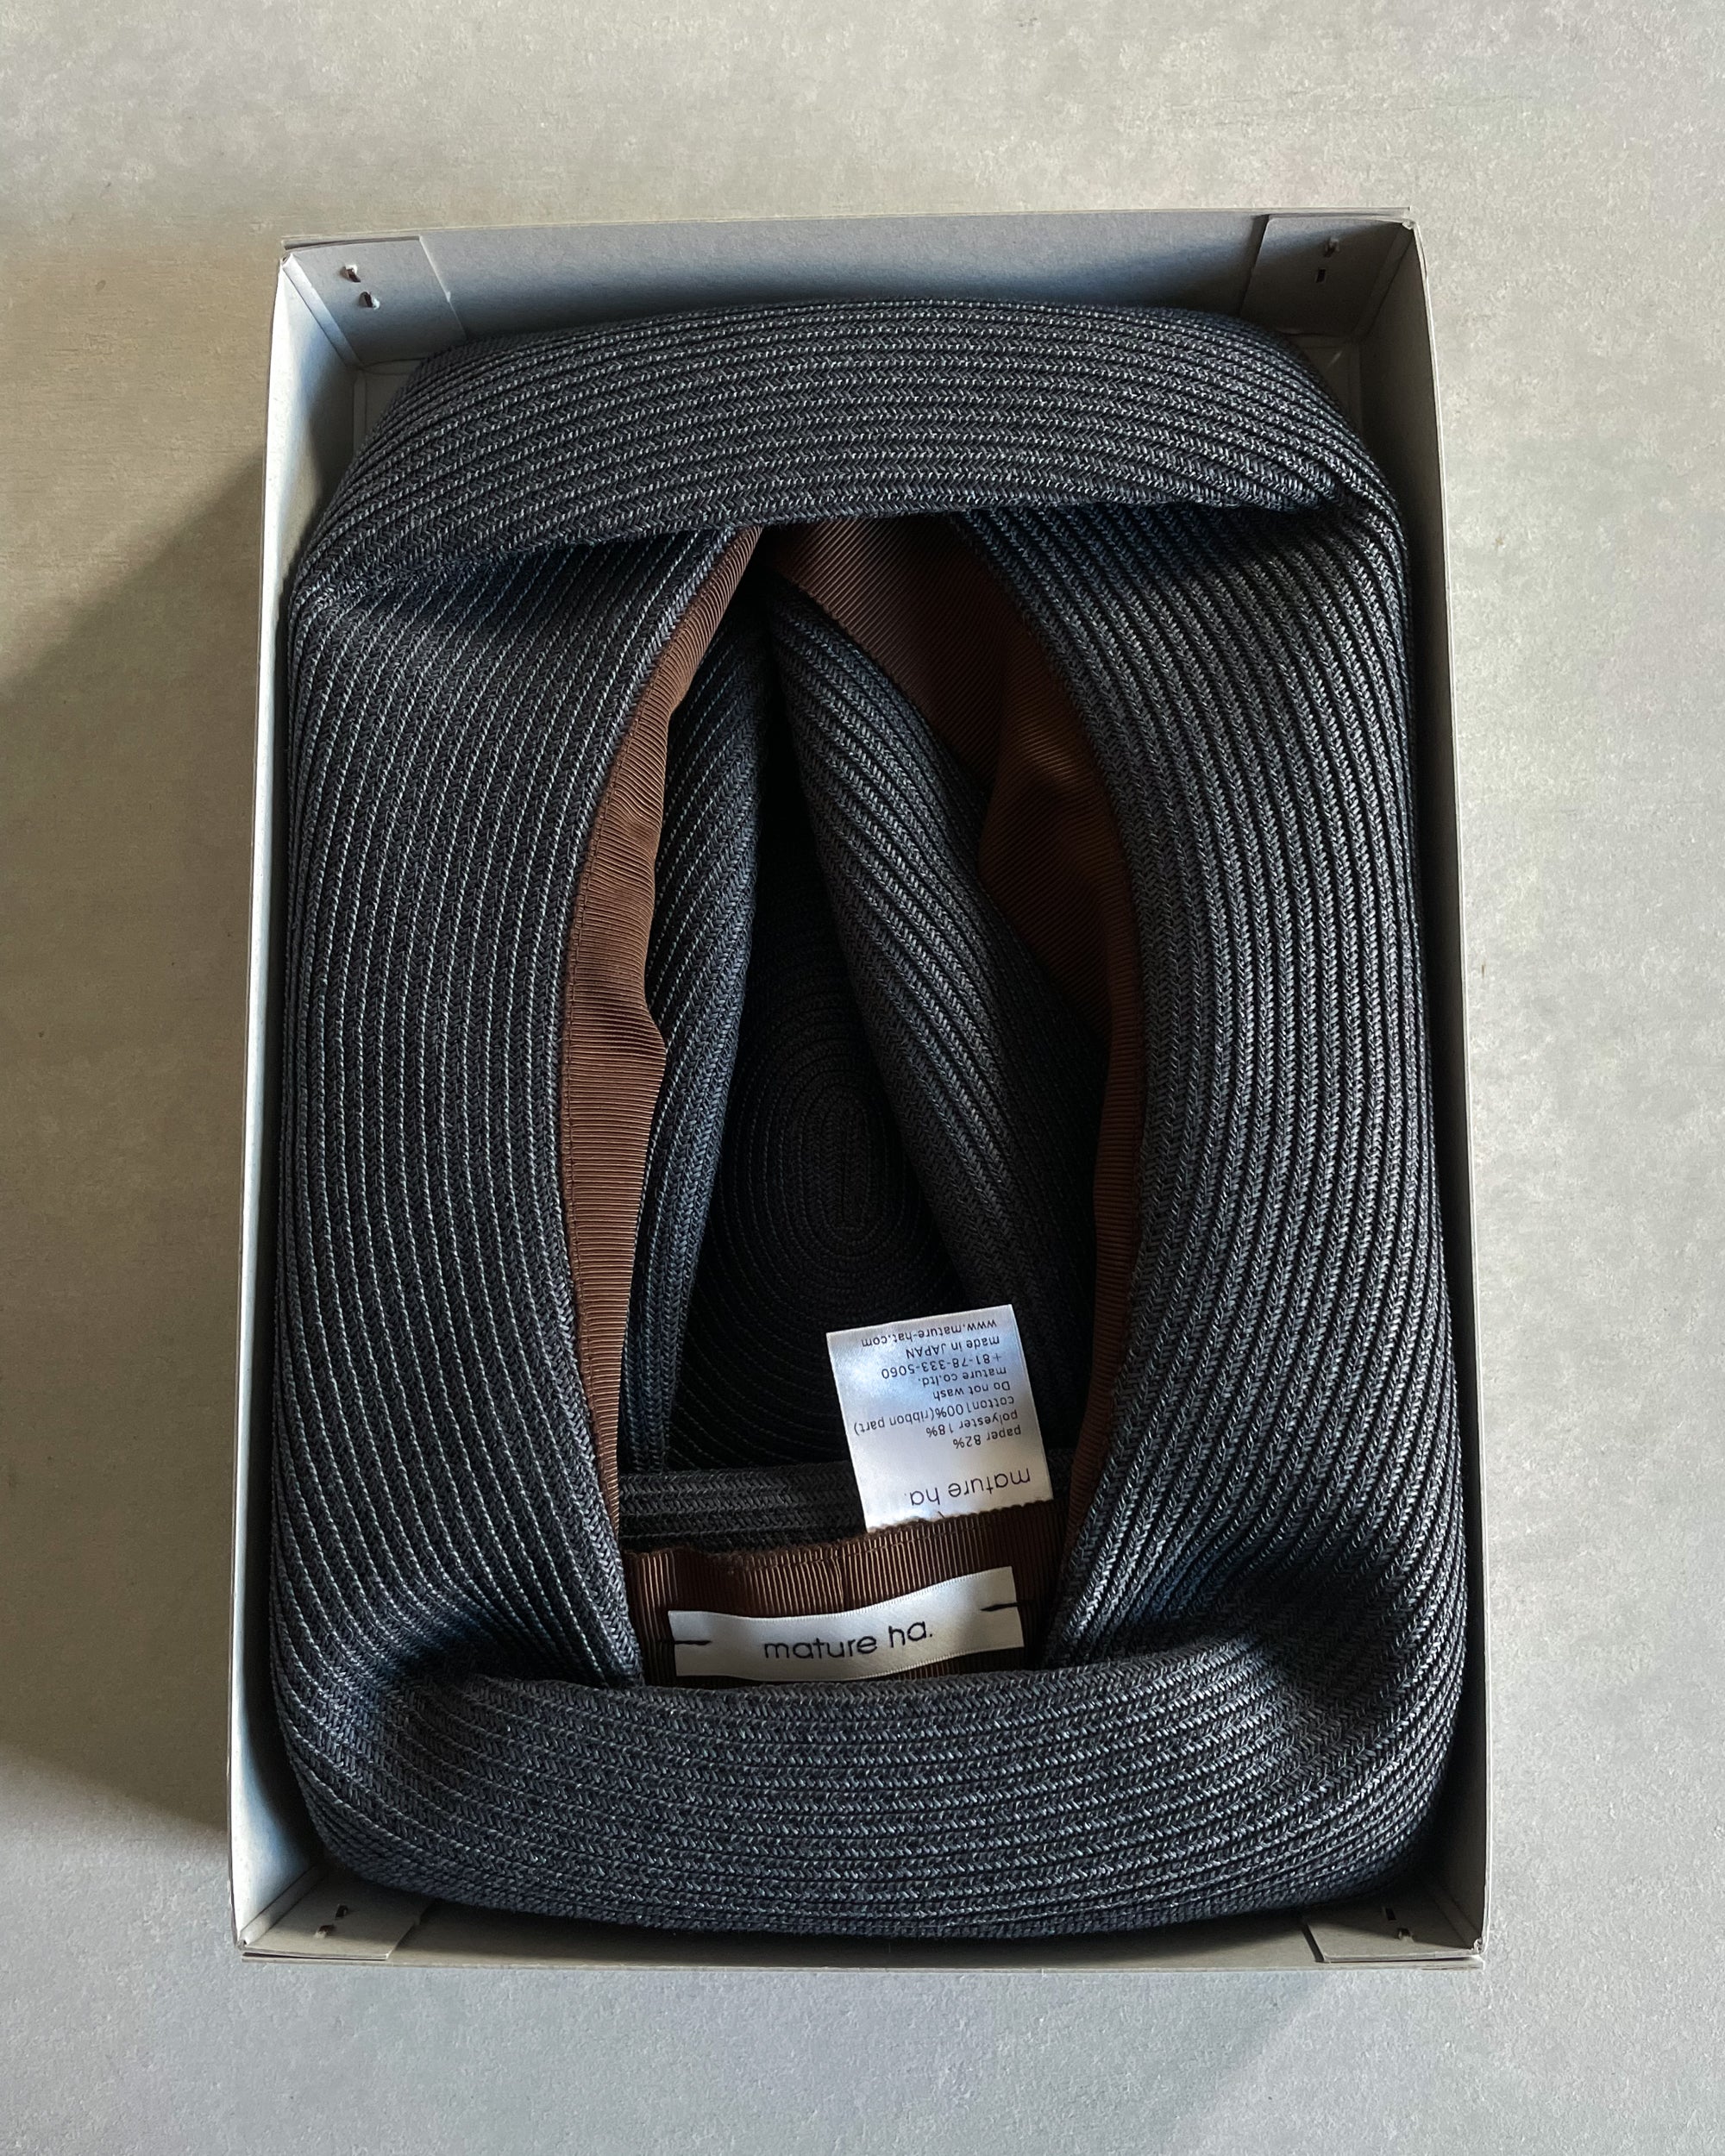 mature ha : boxed hat in charcoal with carbon ribbon